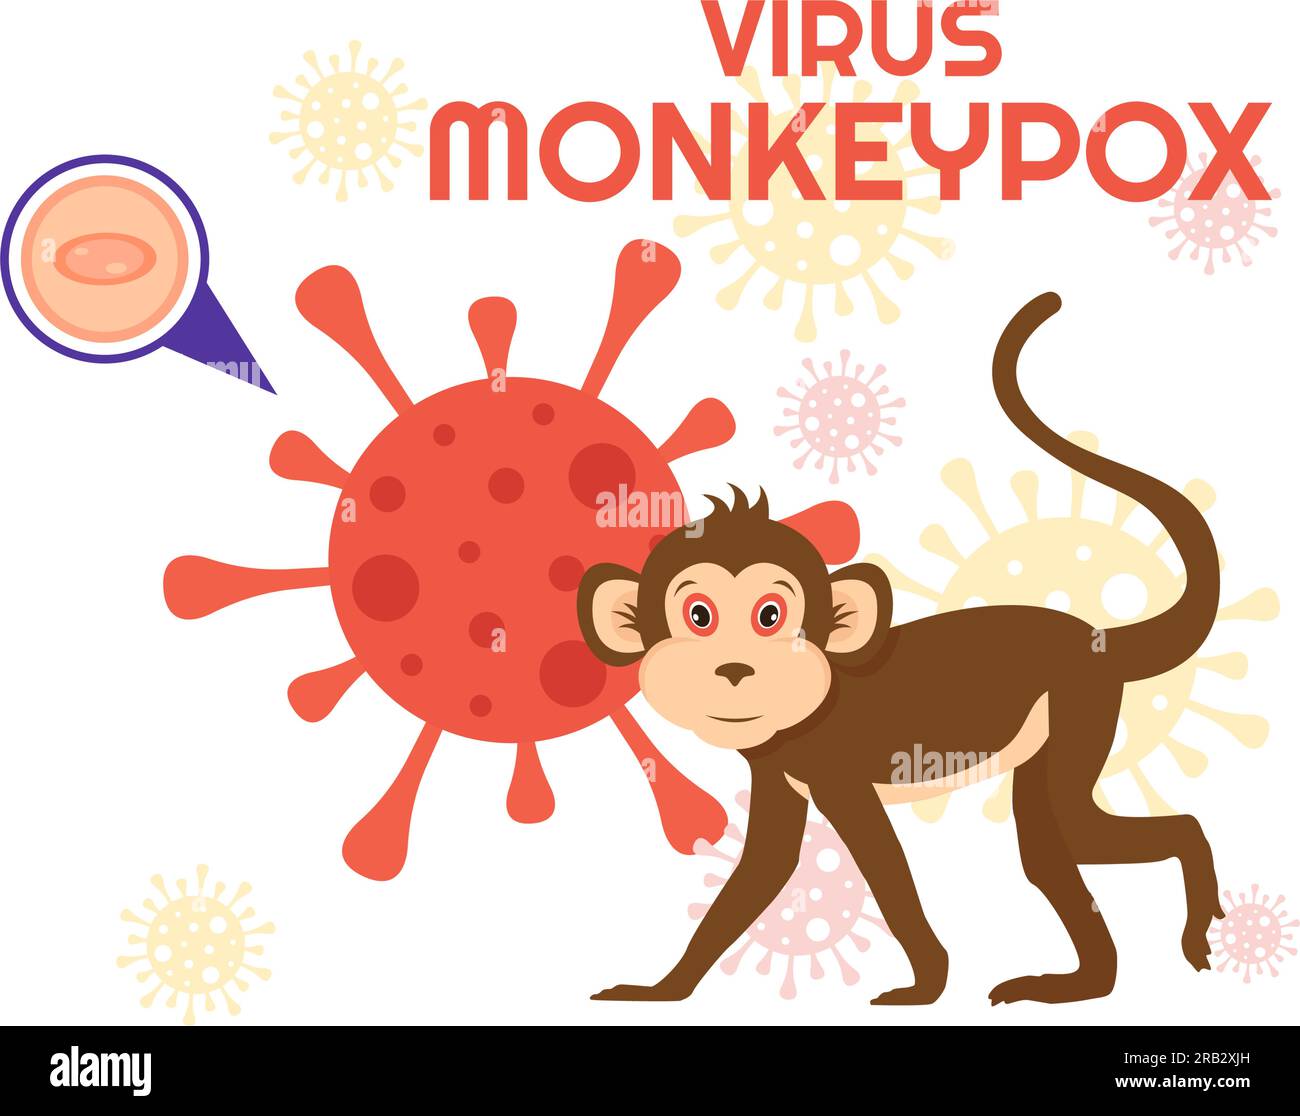 Monkey Pox Outbreak Vector Illustration of Virus Symptoms in Humans Monkeypox Microbiological in Flat Cartoon Hand Drawn Templates Stock Vector